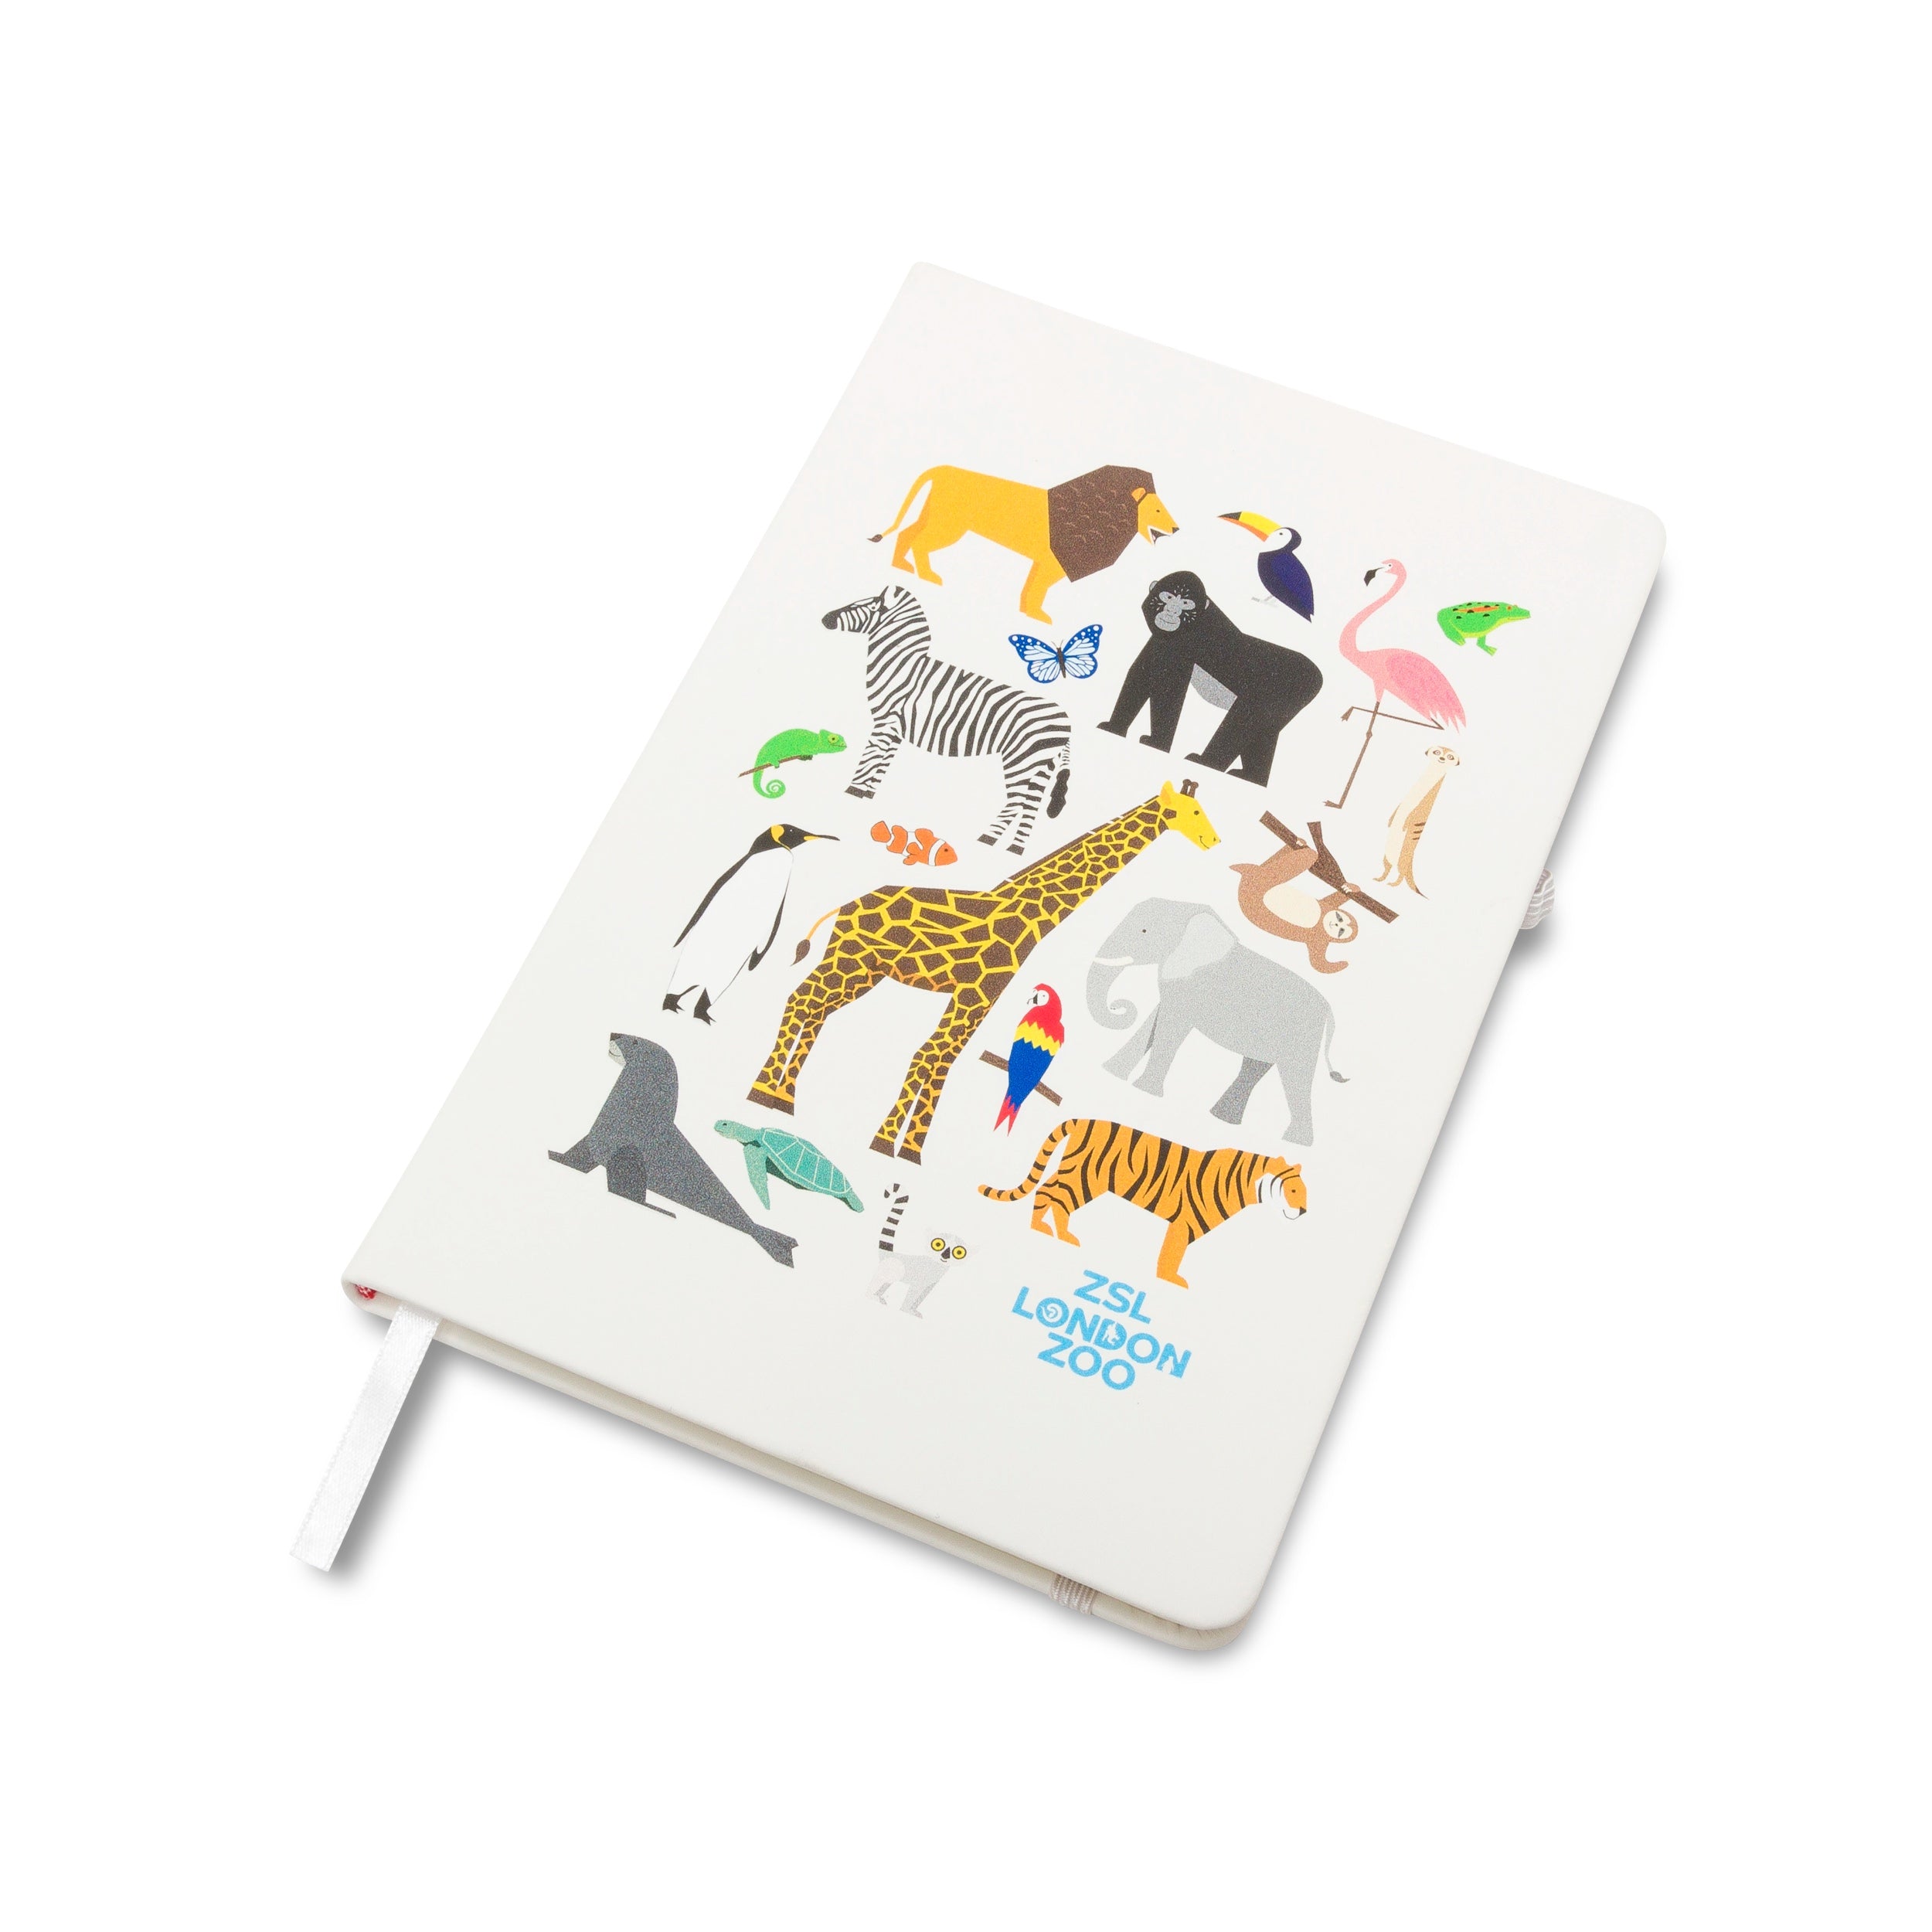 ZSL London Zoo Animals Hardcover Notebook, A5 White